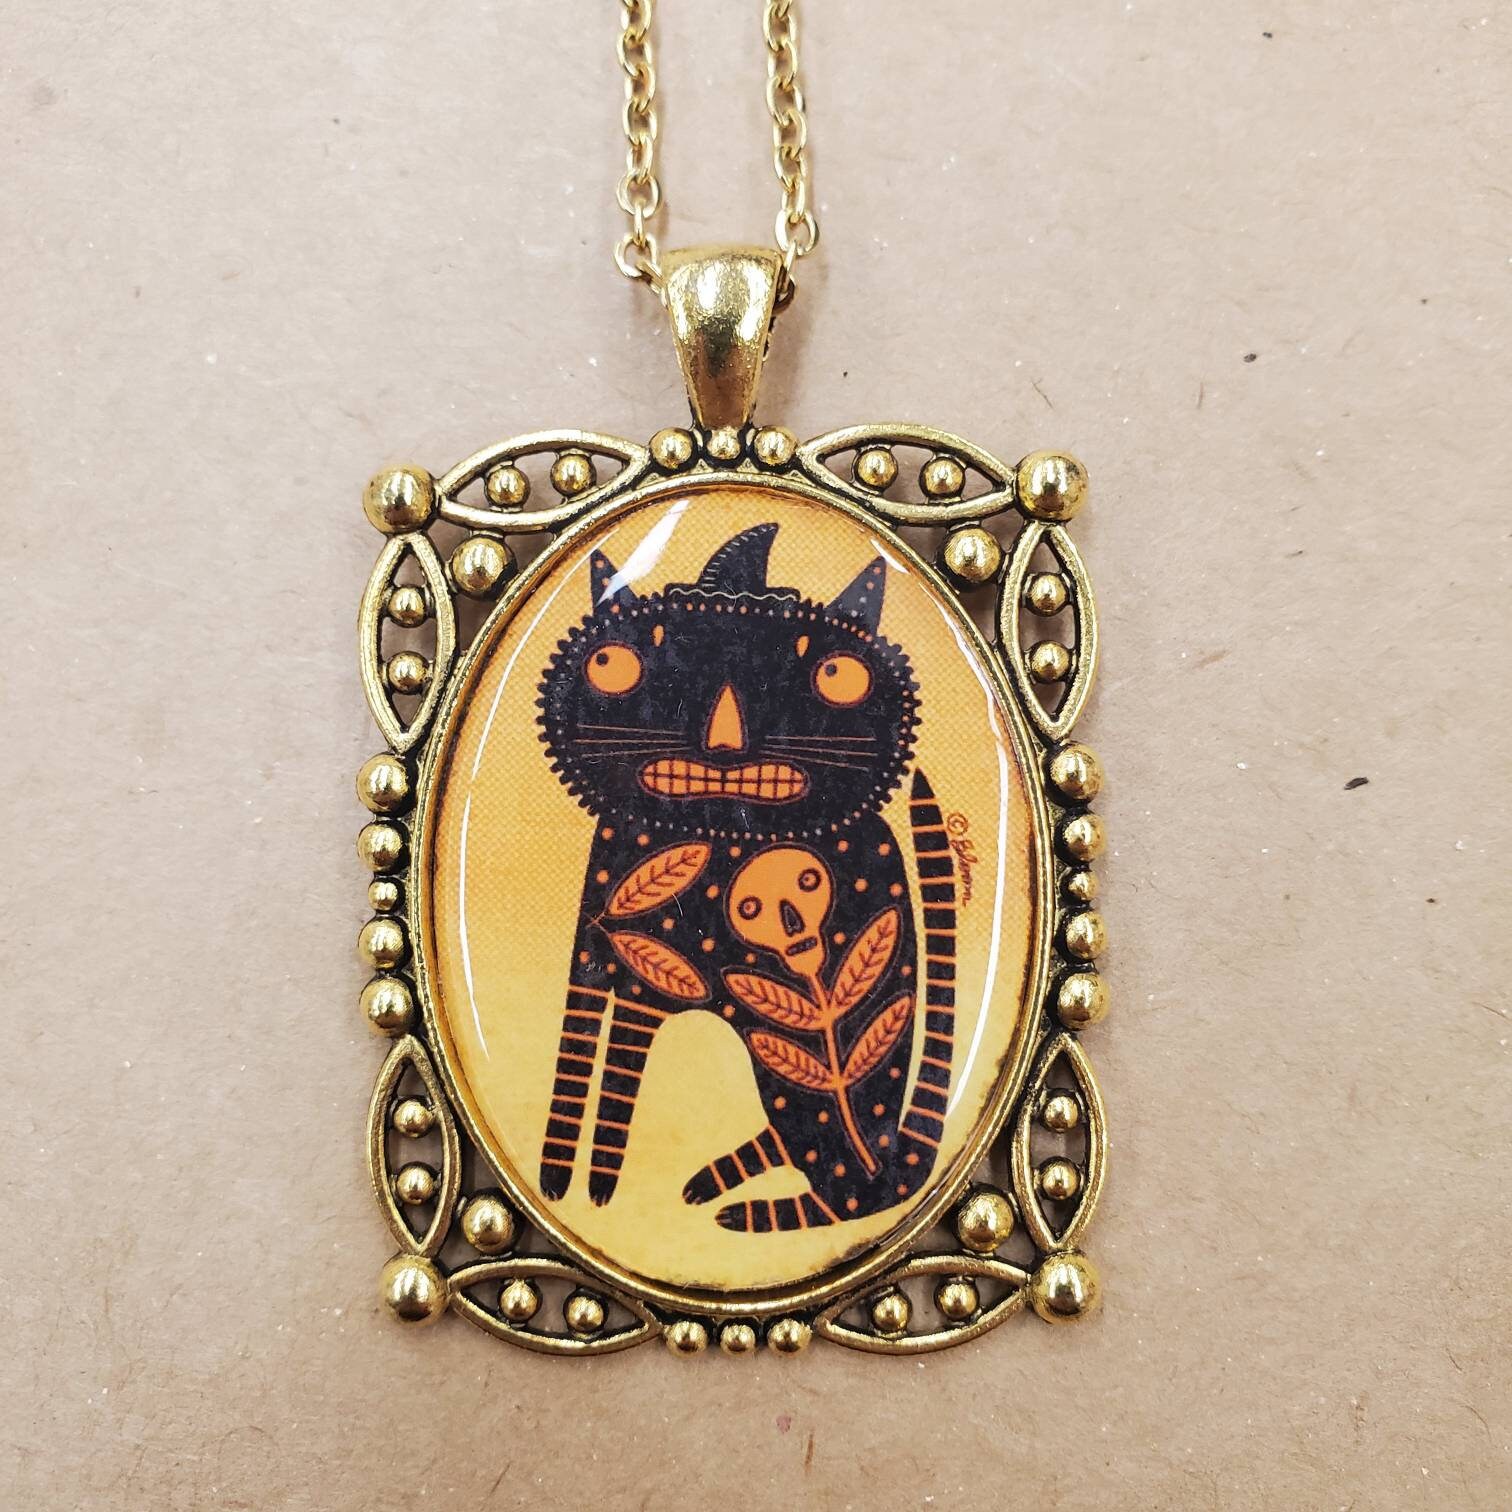 Buy SCAREDY 3 CATS Tv Show Halloween Pendant Necklace Digital Online in  India 